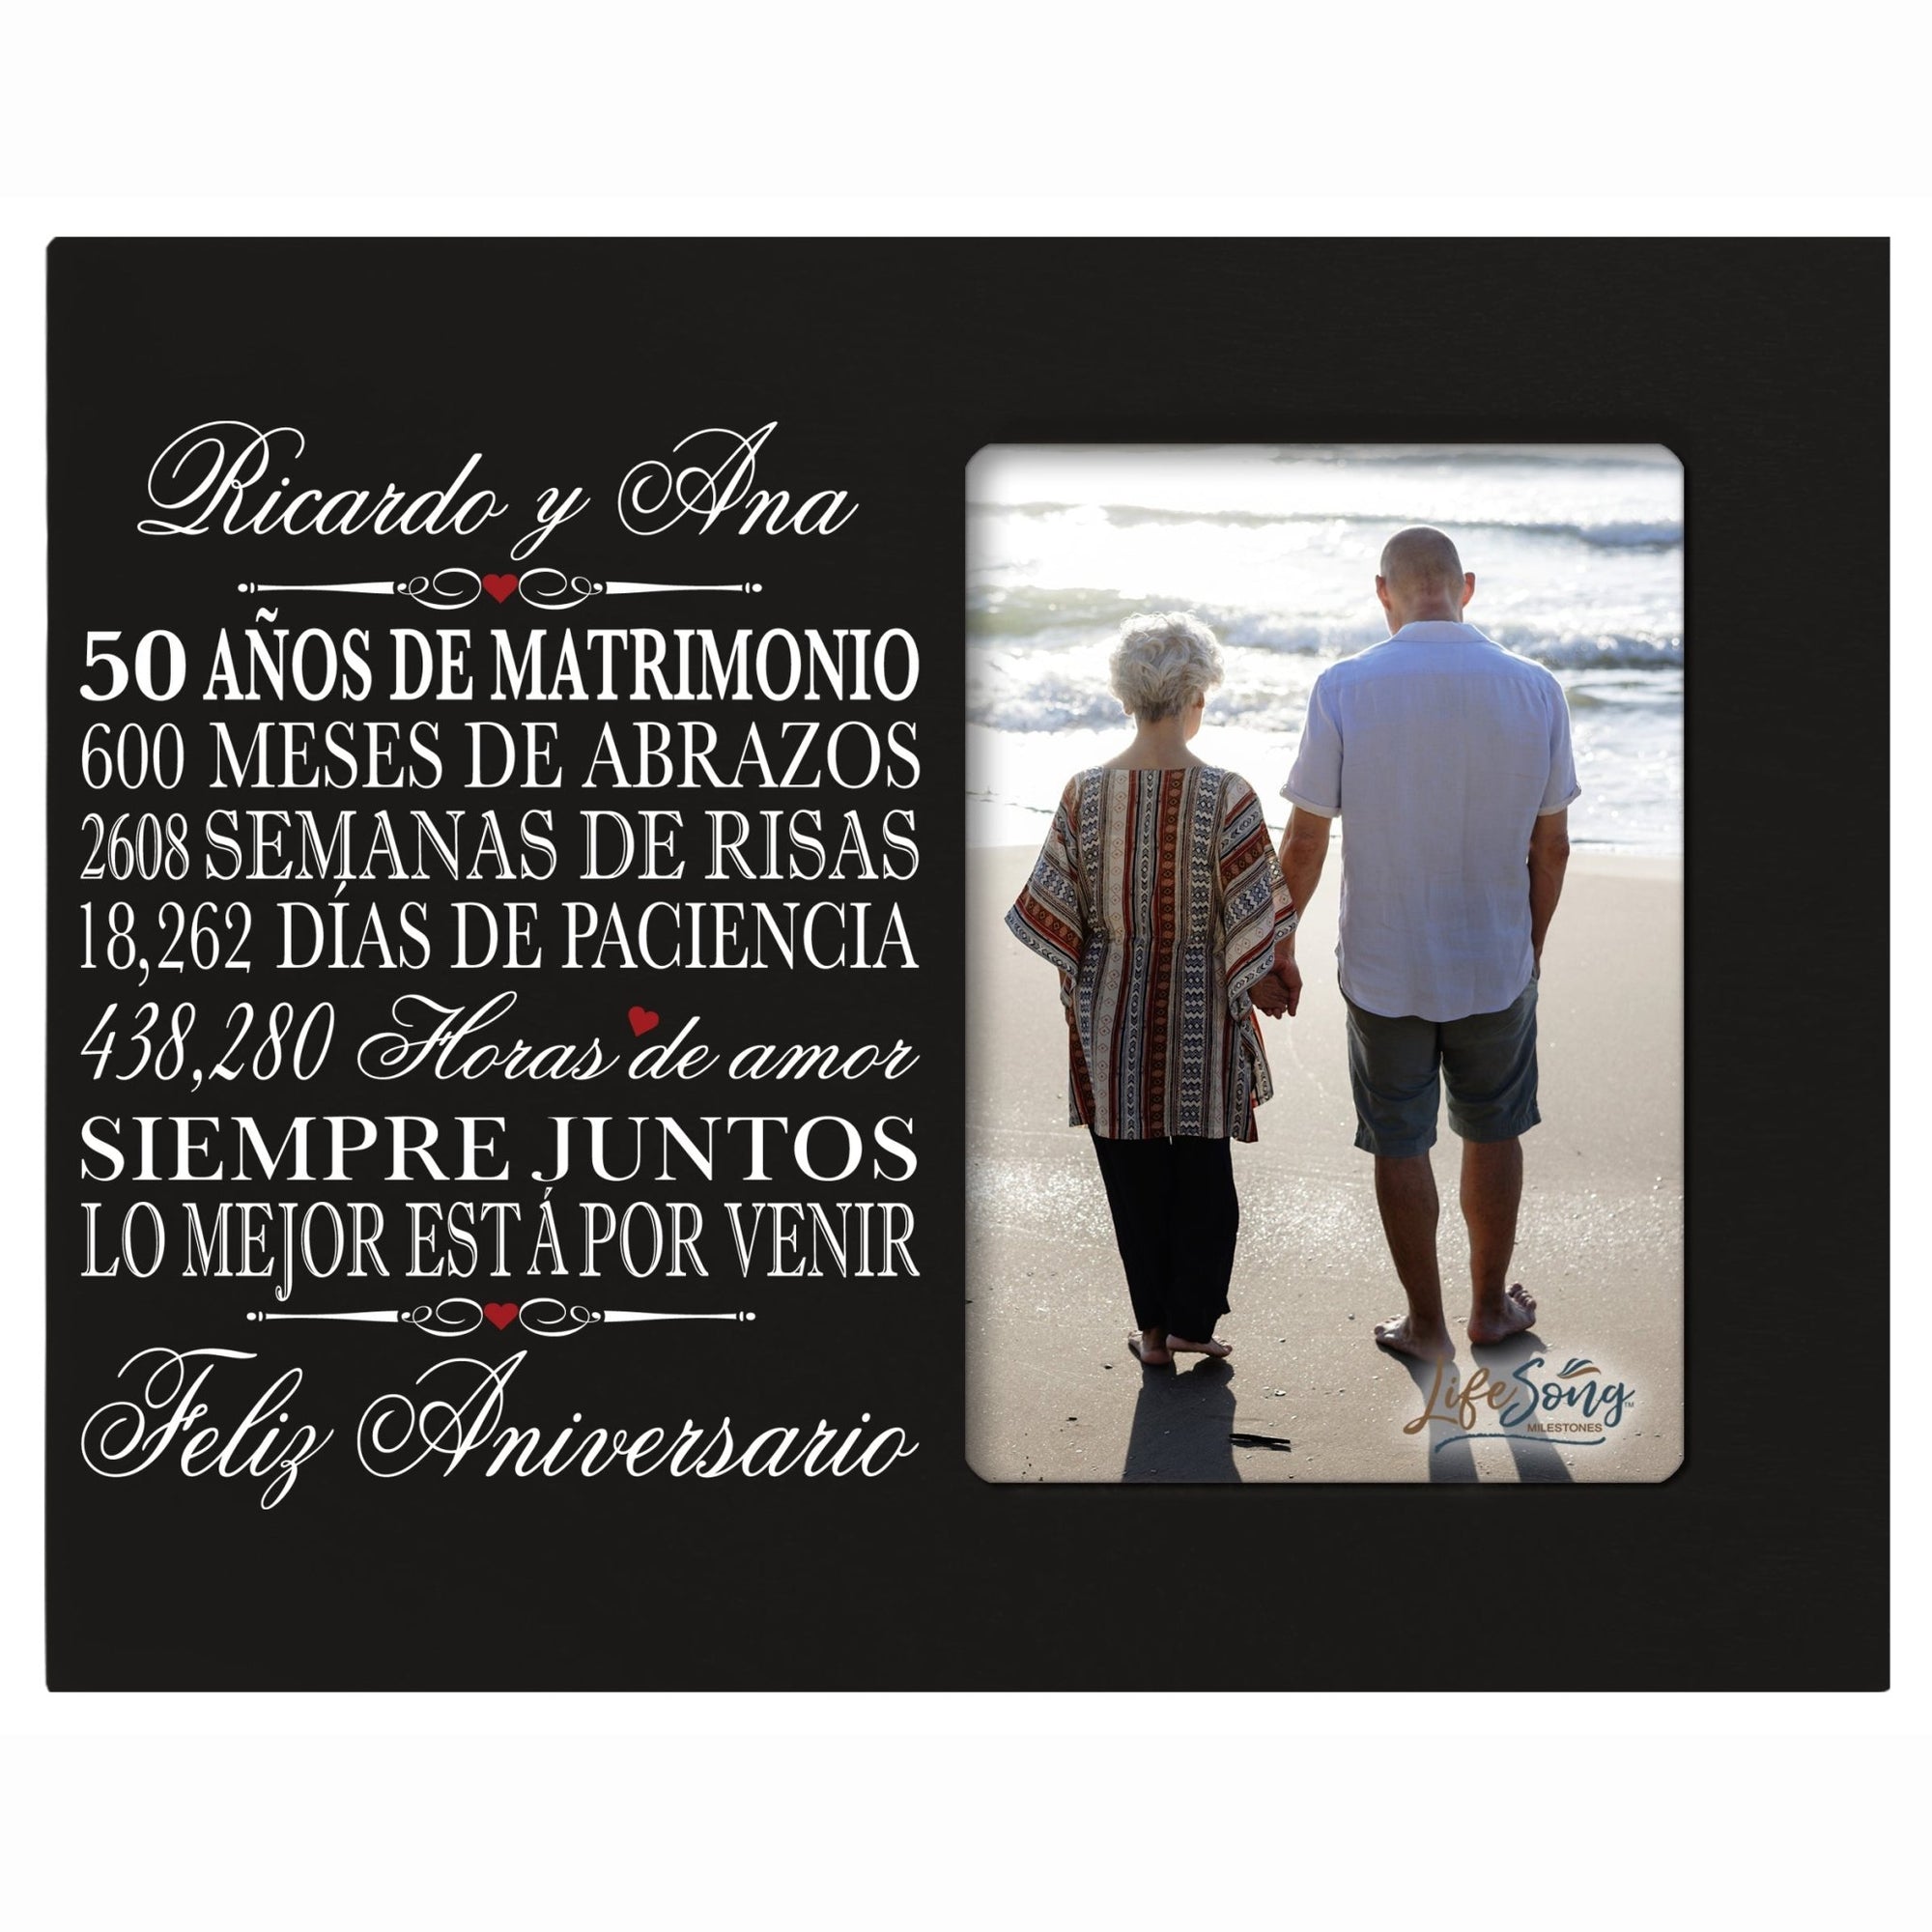 Lifesong Milestones Personalized Couples 50th Wedding Anniversary Spanish Picture Frame